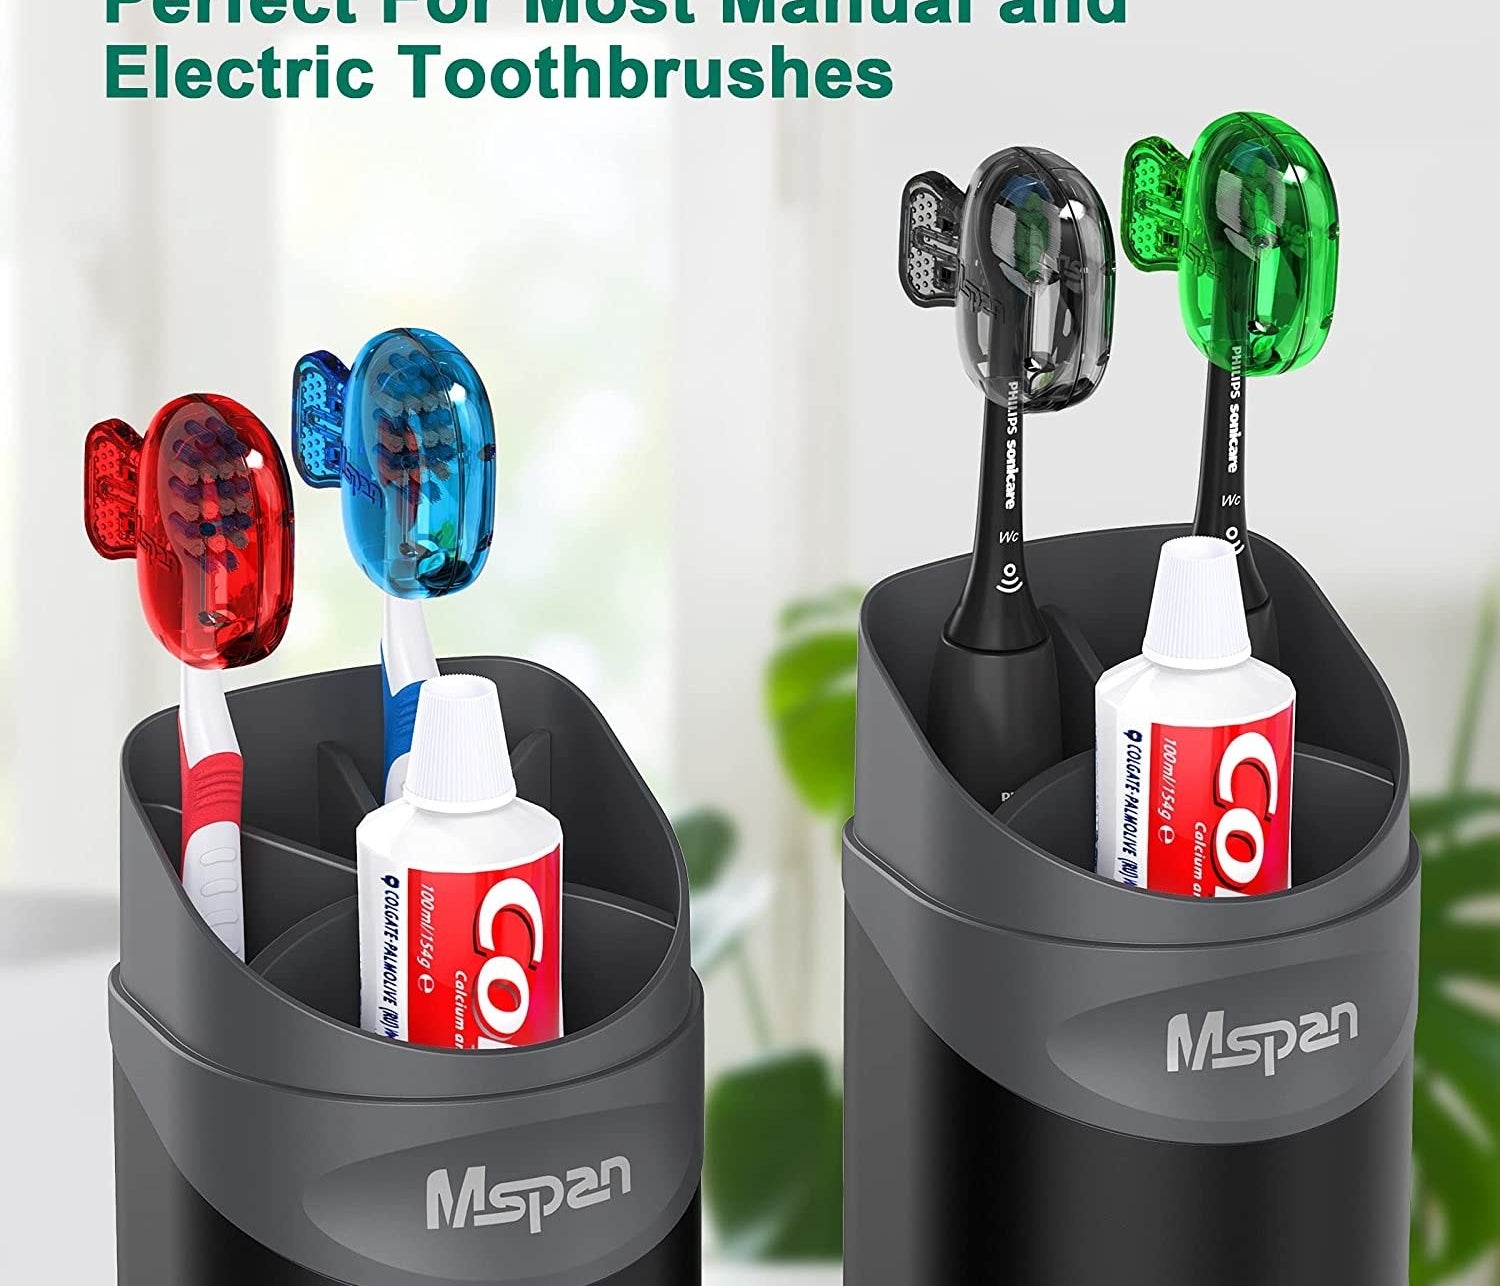 Four toothbrushes with clips on them